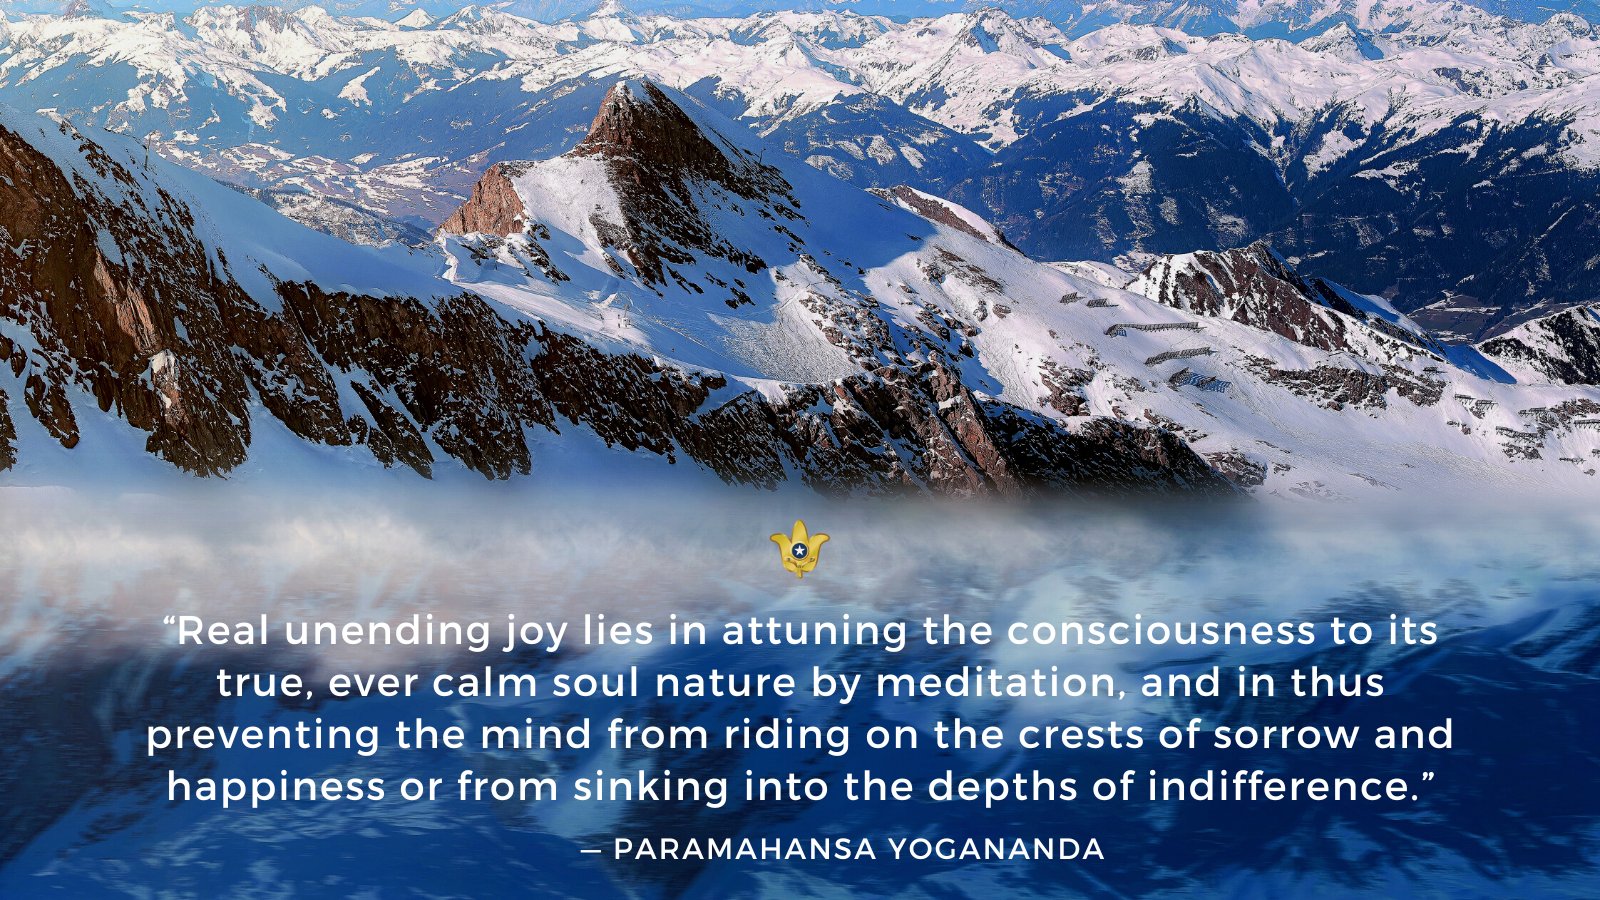 “Real unending joy lies in attuning the consciousness to its true, ever calm soul nature by meditation, and in thus preventing the mind from riding on the crests of sorrow and happiness or from sinking into the depths of indifference.” — Paramahansa Yogananda https://t.co/p6hwrKLrP5